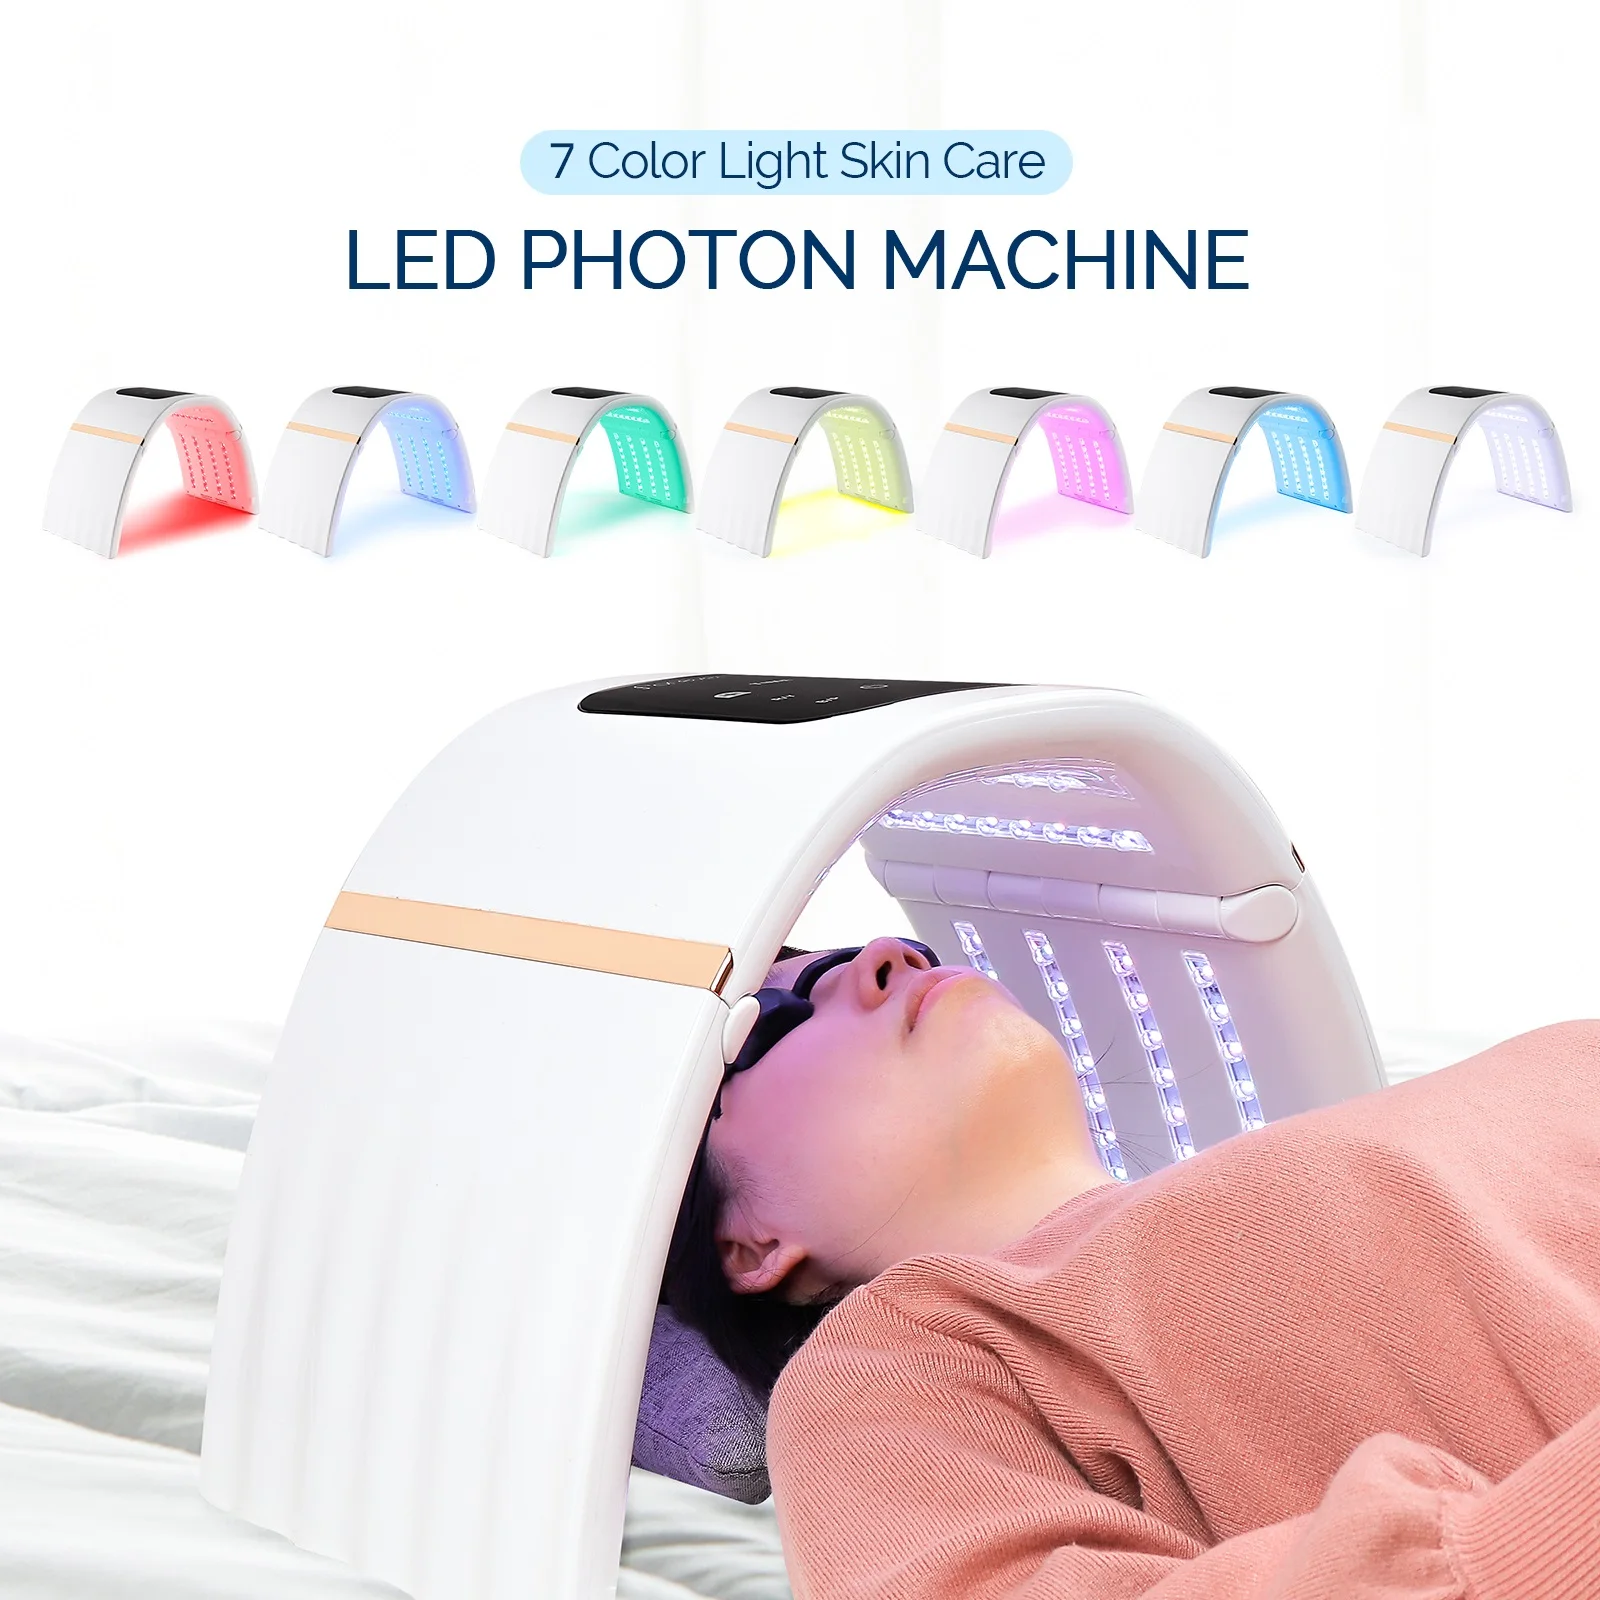 

Led Face Light Therapy PDT Photon Facial Mask Skin Rejuvenation Anti Acne Smooth Wrinkle Brighten Home Use SPA Device